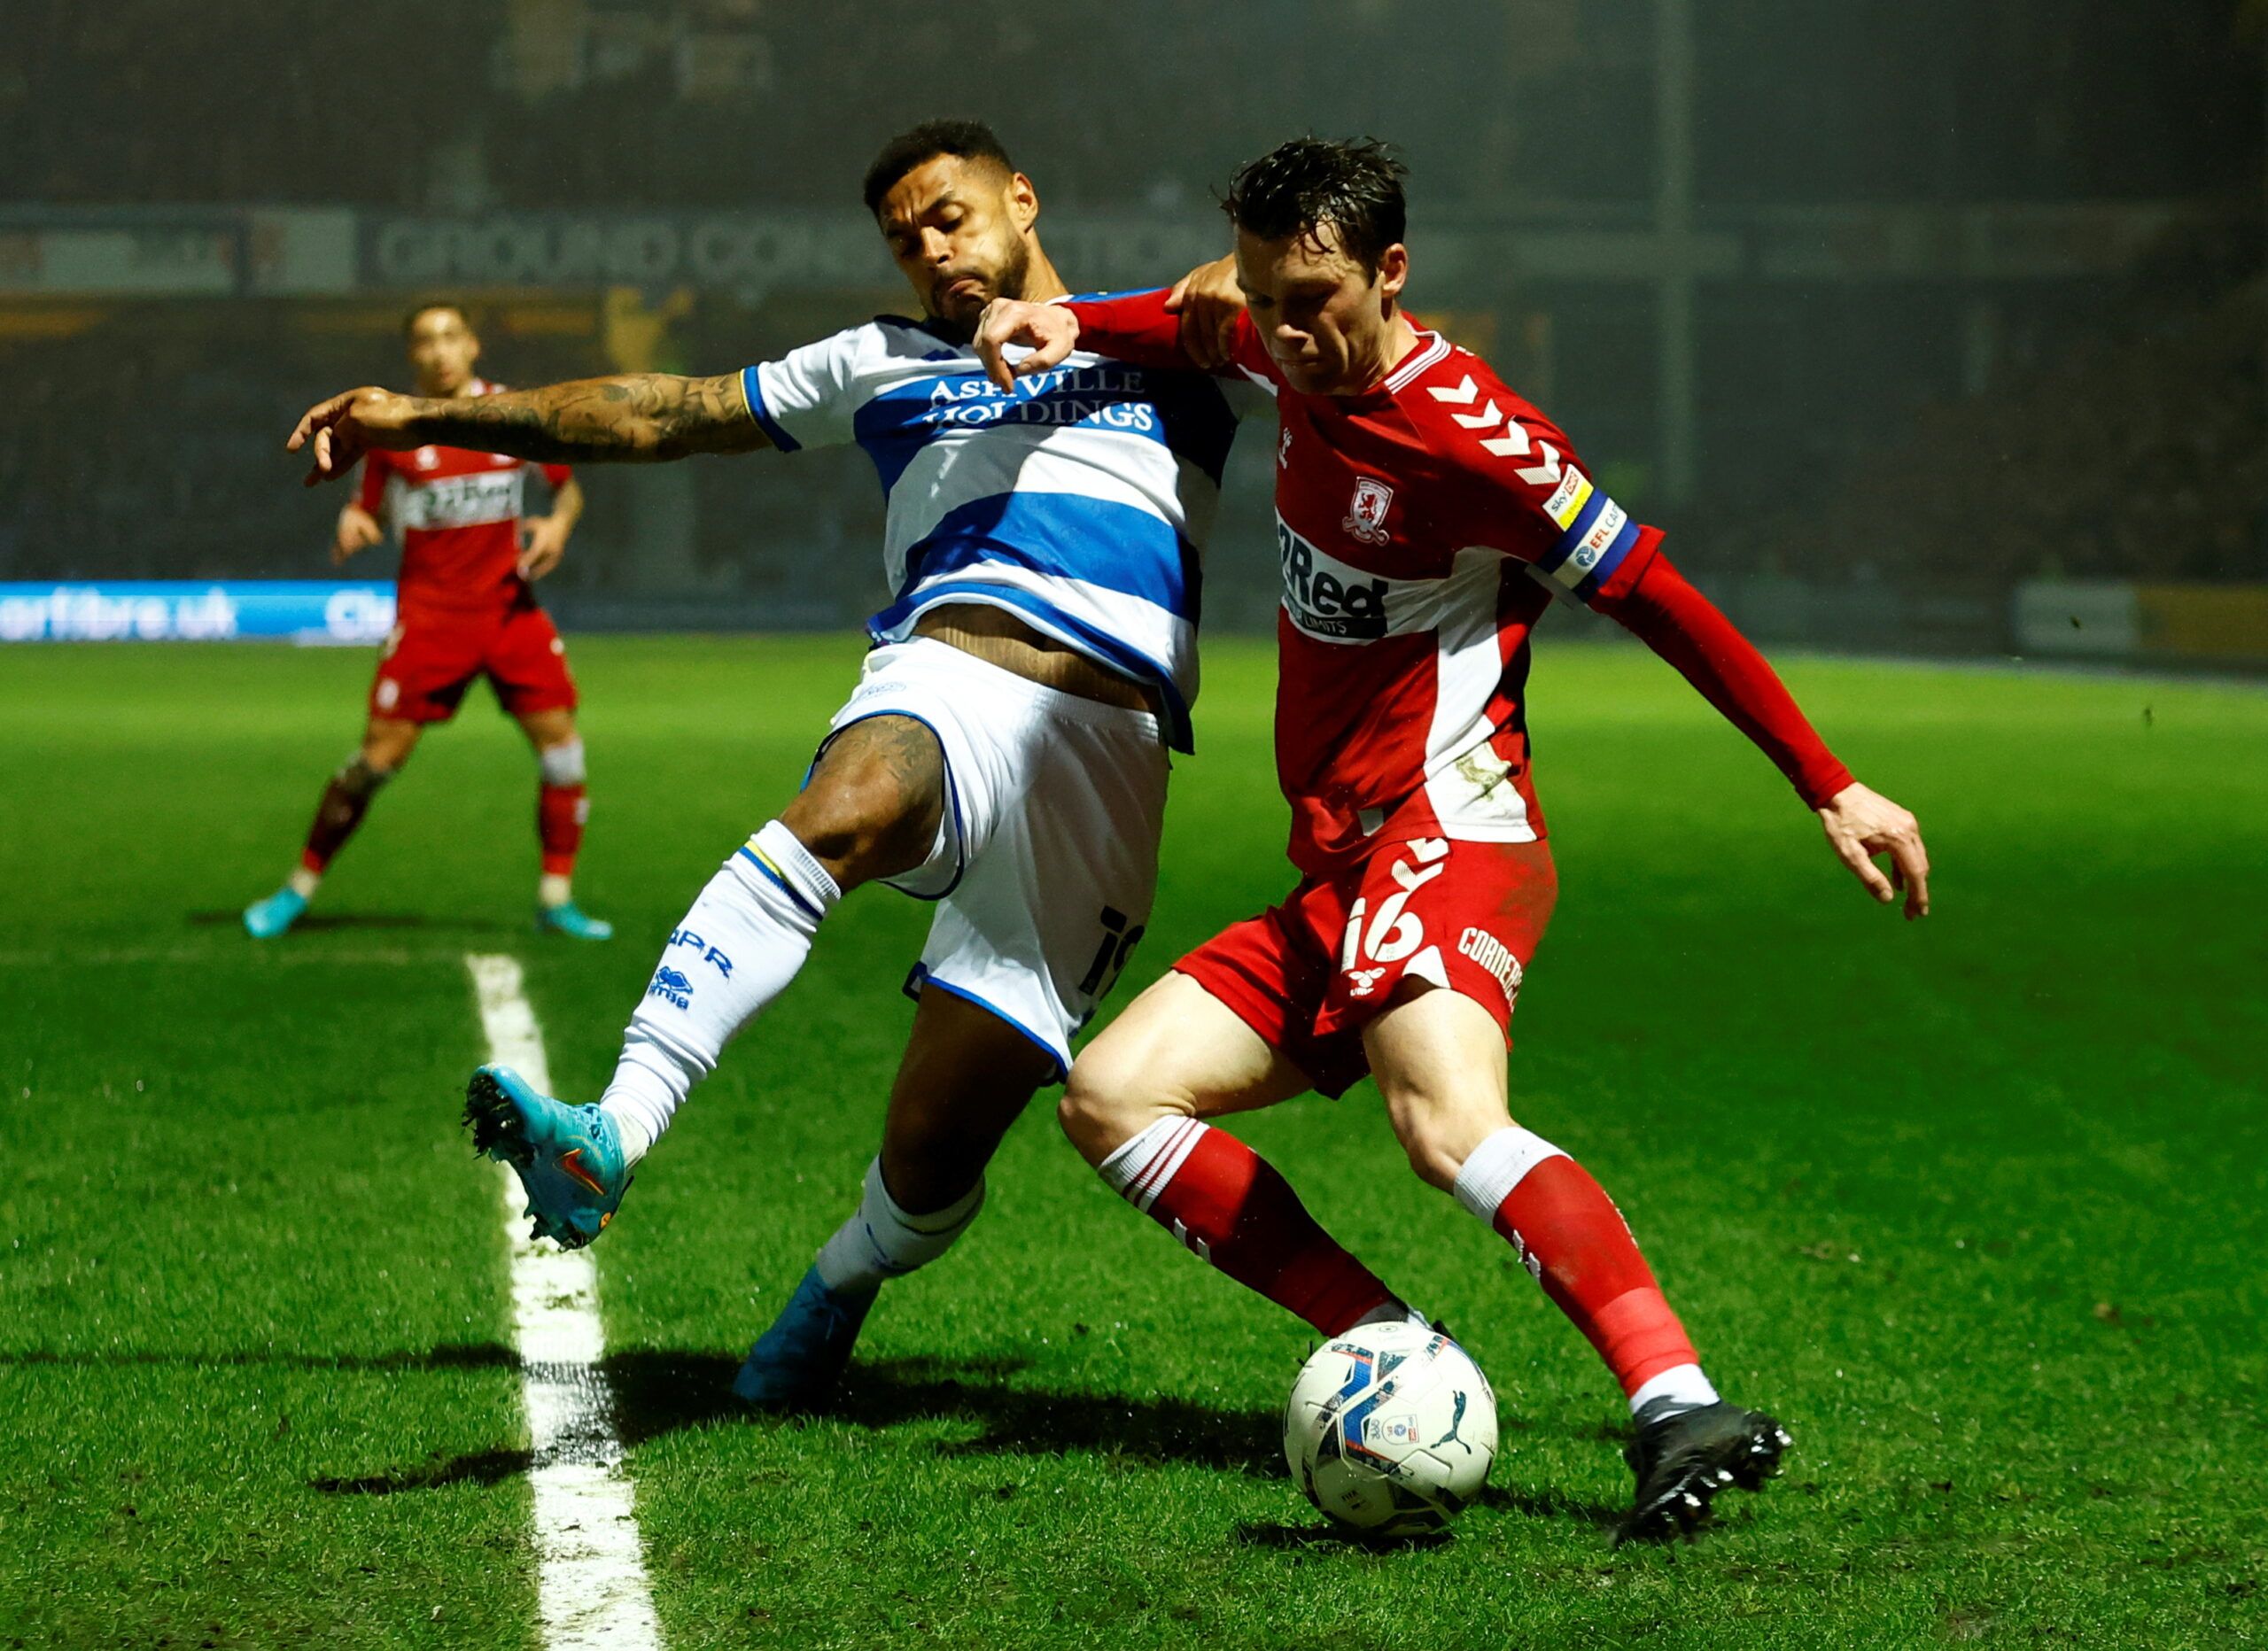 Soccer Football - Championship - Queens Park Rangers v Middlesbrough - Loftus Road, London, Britain - February 9, 2022  Queens Park Rangers' Andre Gray in action with Middlesbrough's Jonny Howson  Action Images/Andrew Boyers  EDITORIAL USE ONLY. No use with unauthorized audio, video, data, fixture lists, club/league logos or 